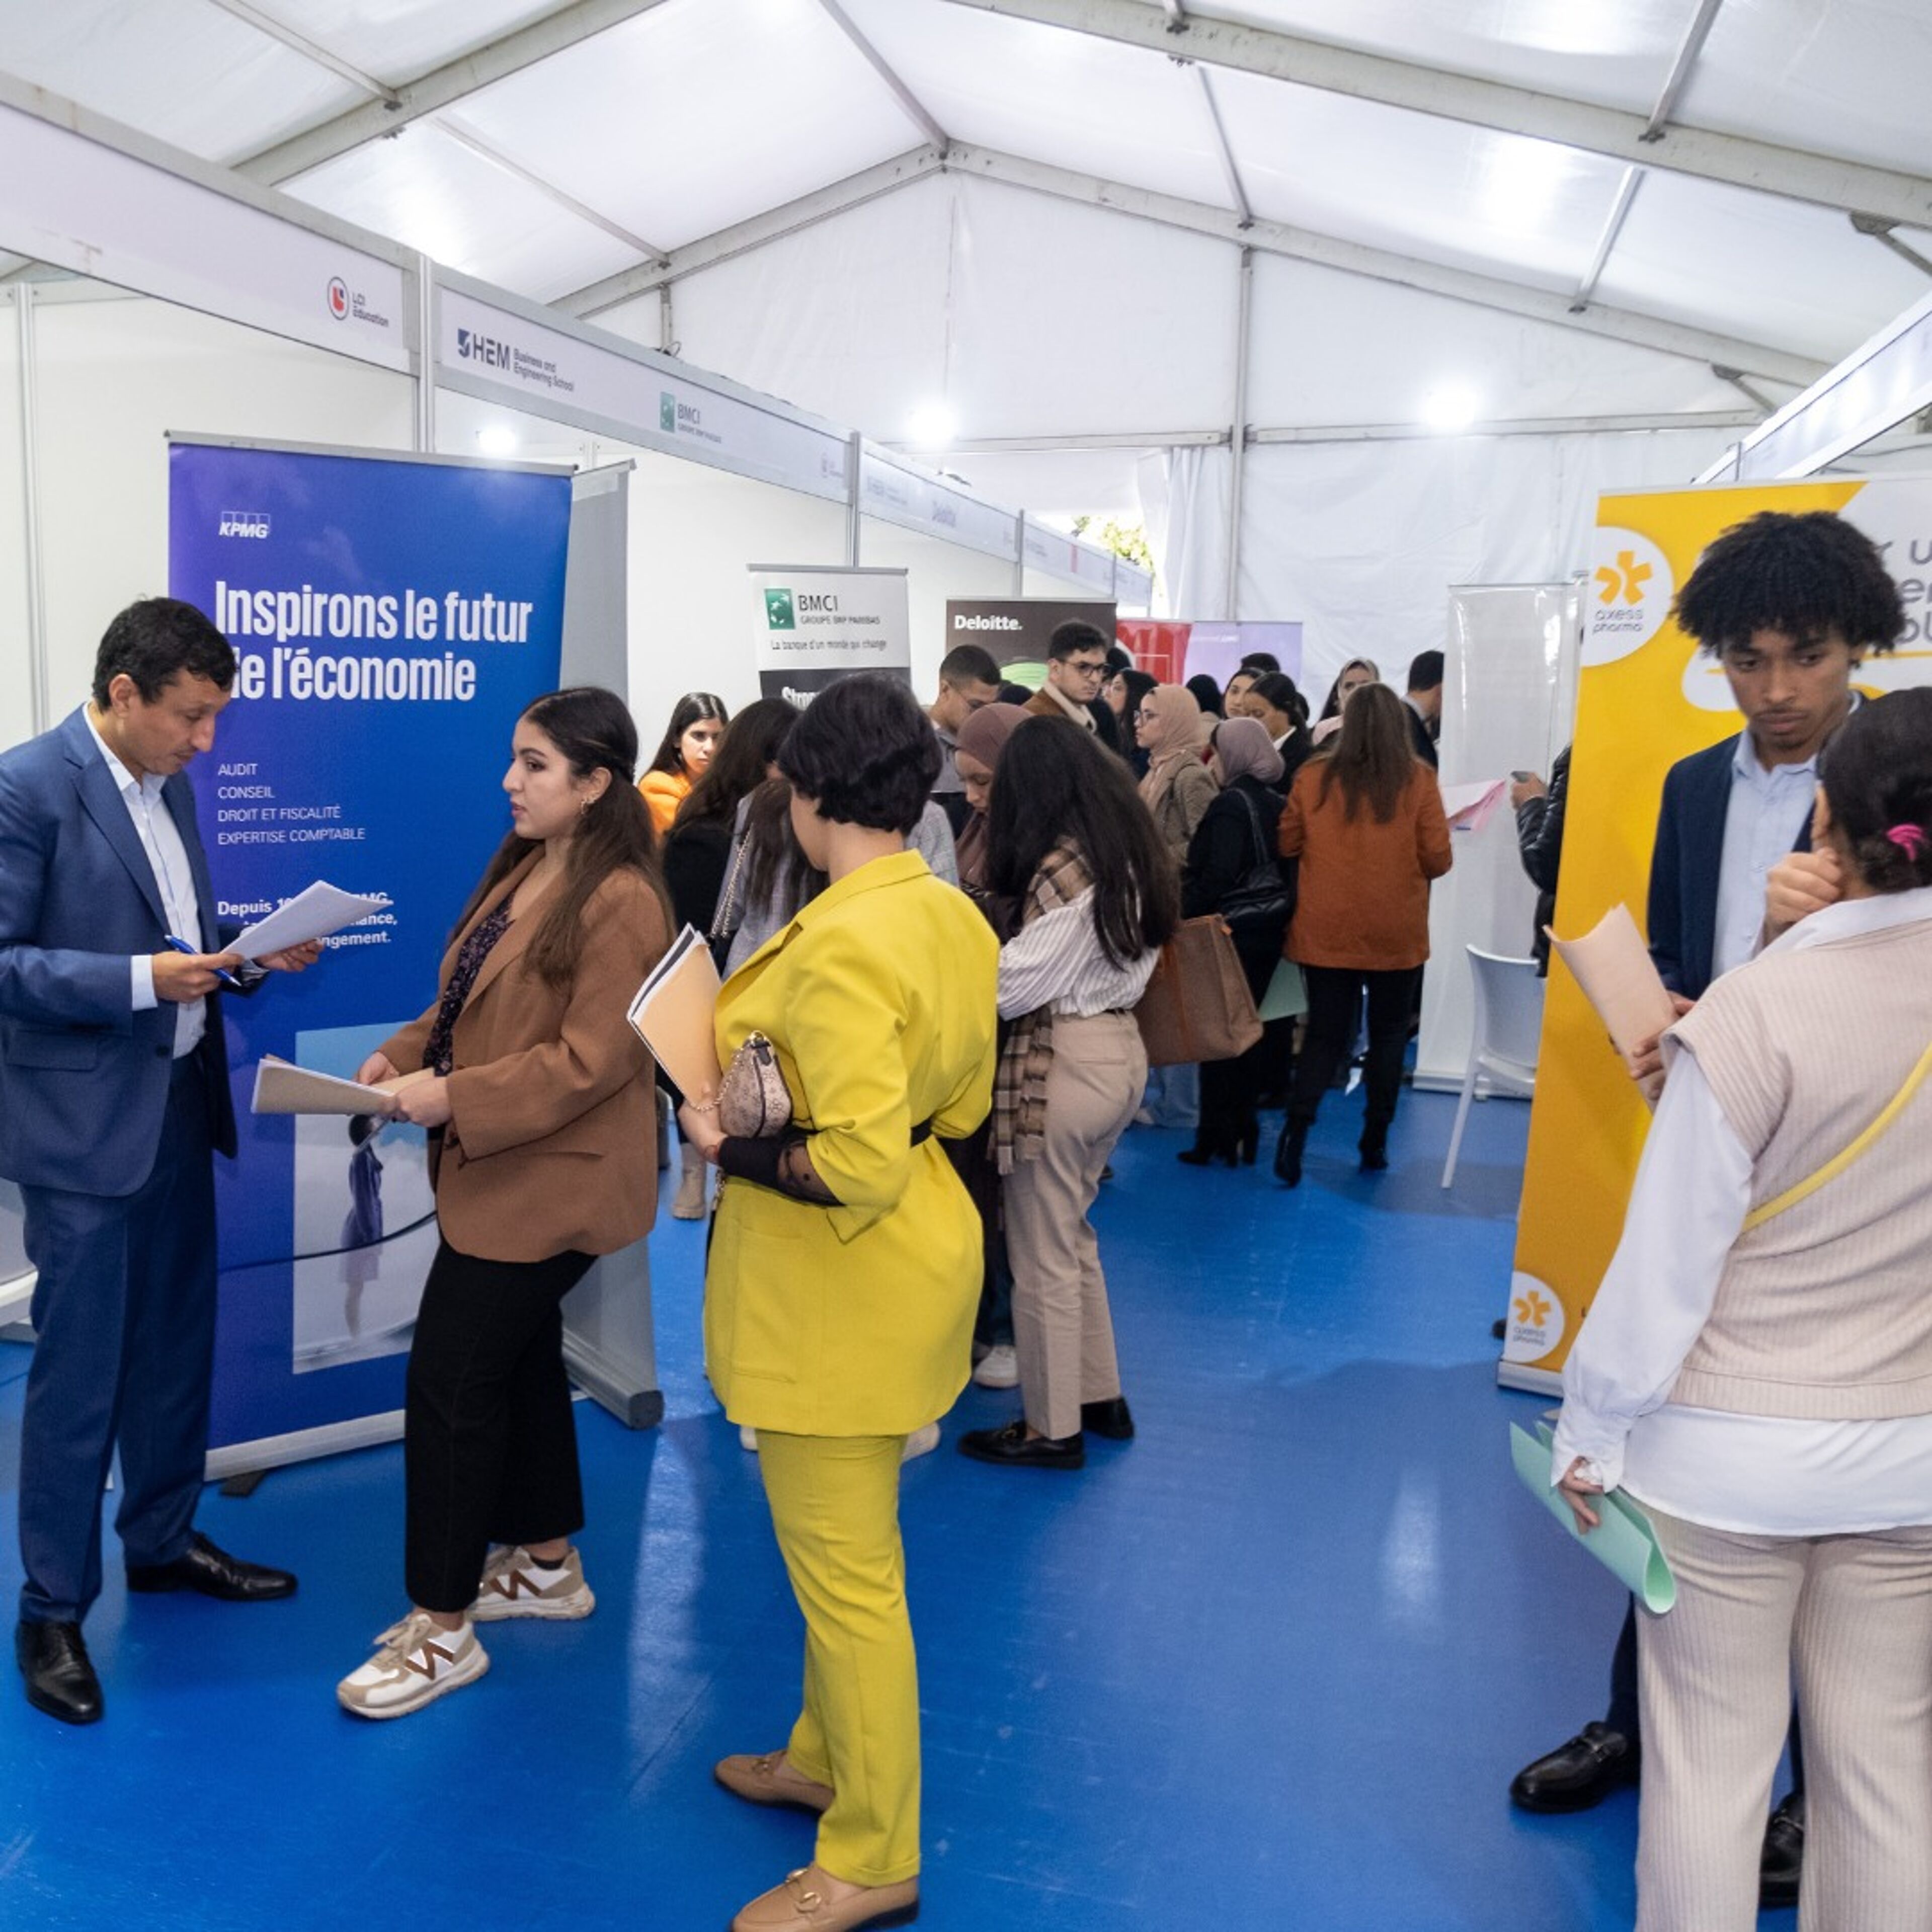 Professionals and students interacting at various booths during a career fair in a tented space.